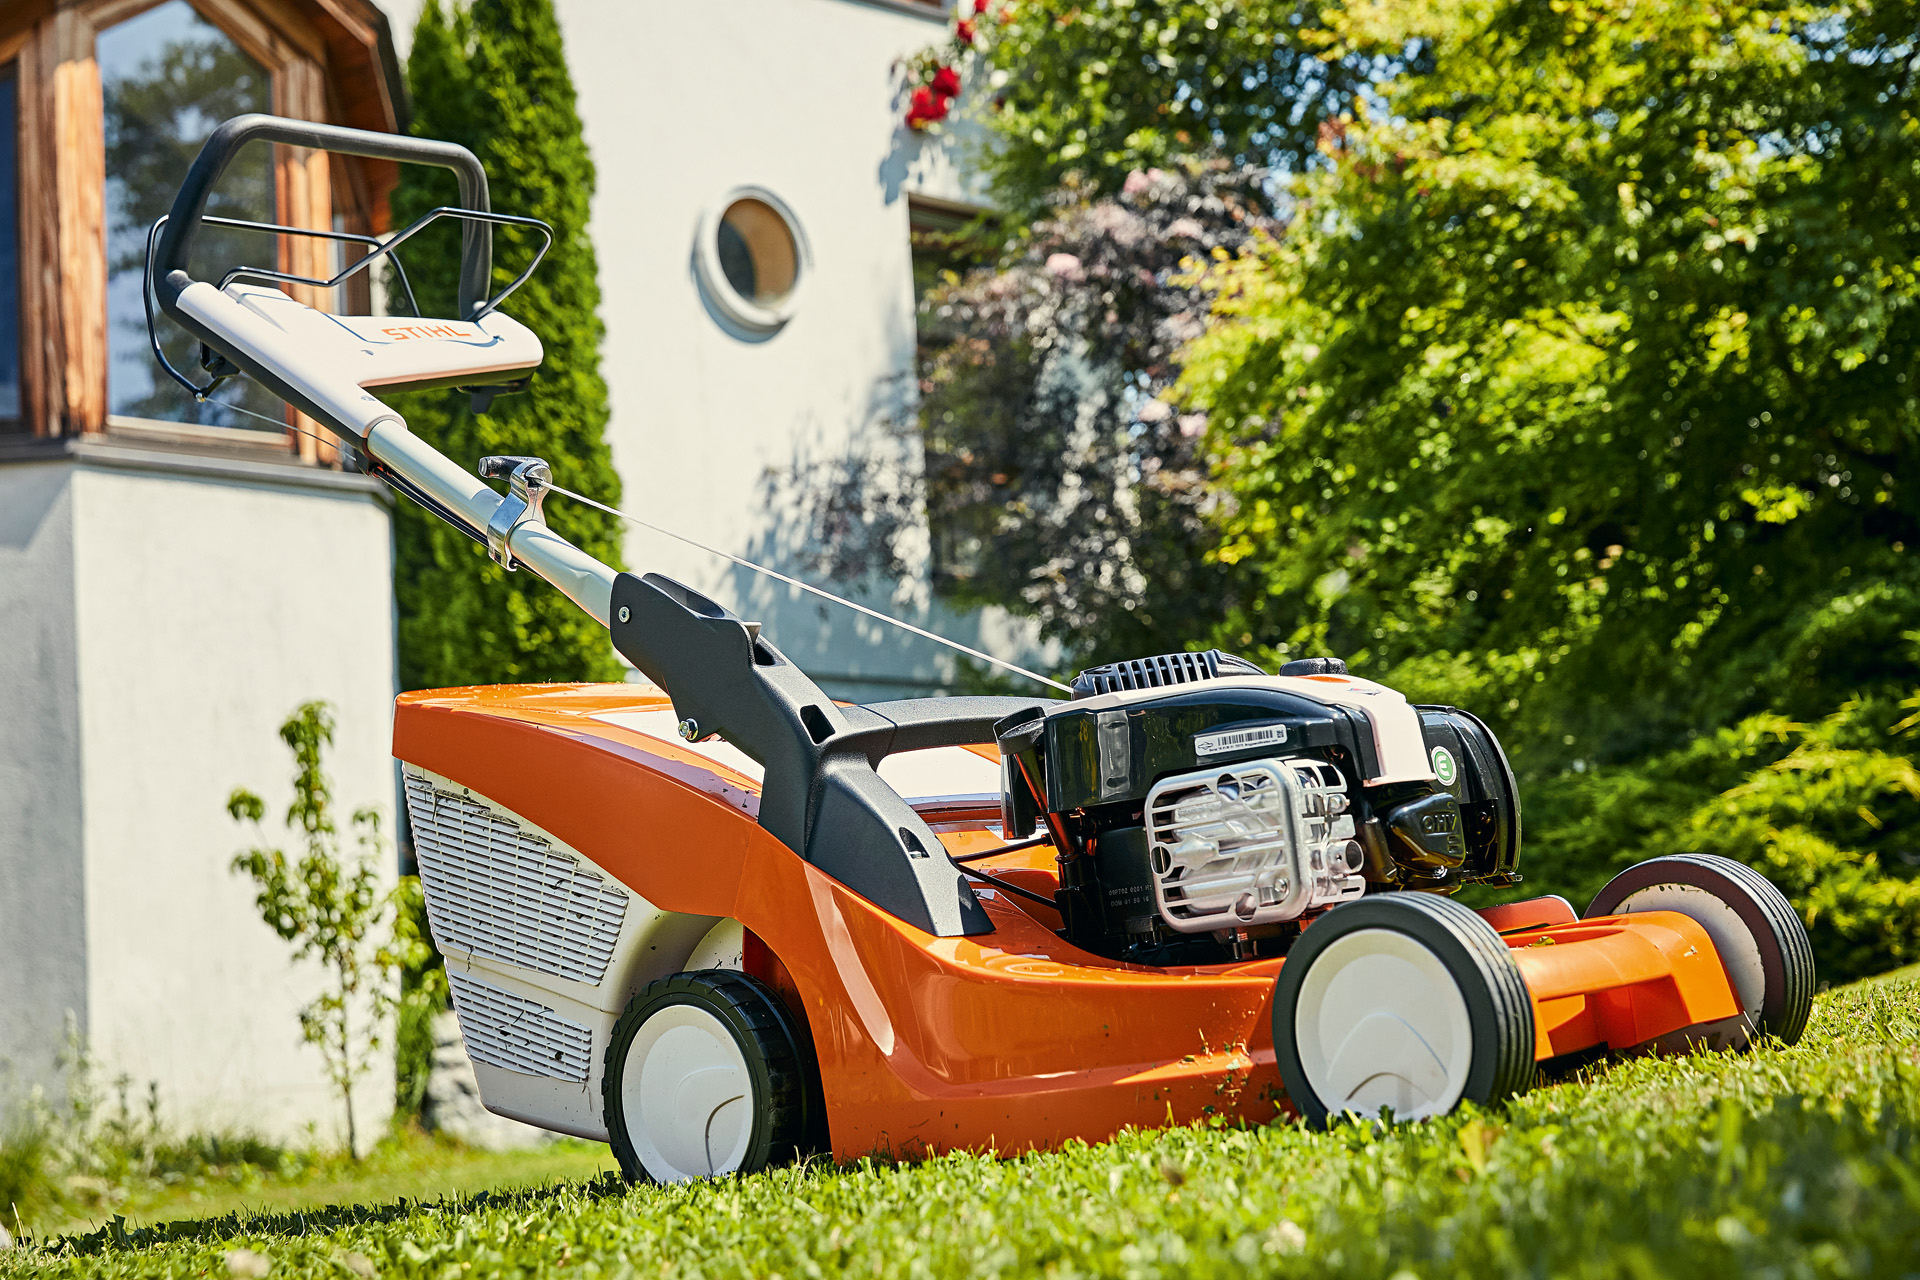 A STIHL RM 443 T petrol lawn mower in a garden with a house in the background